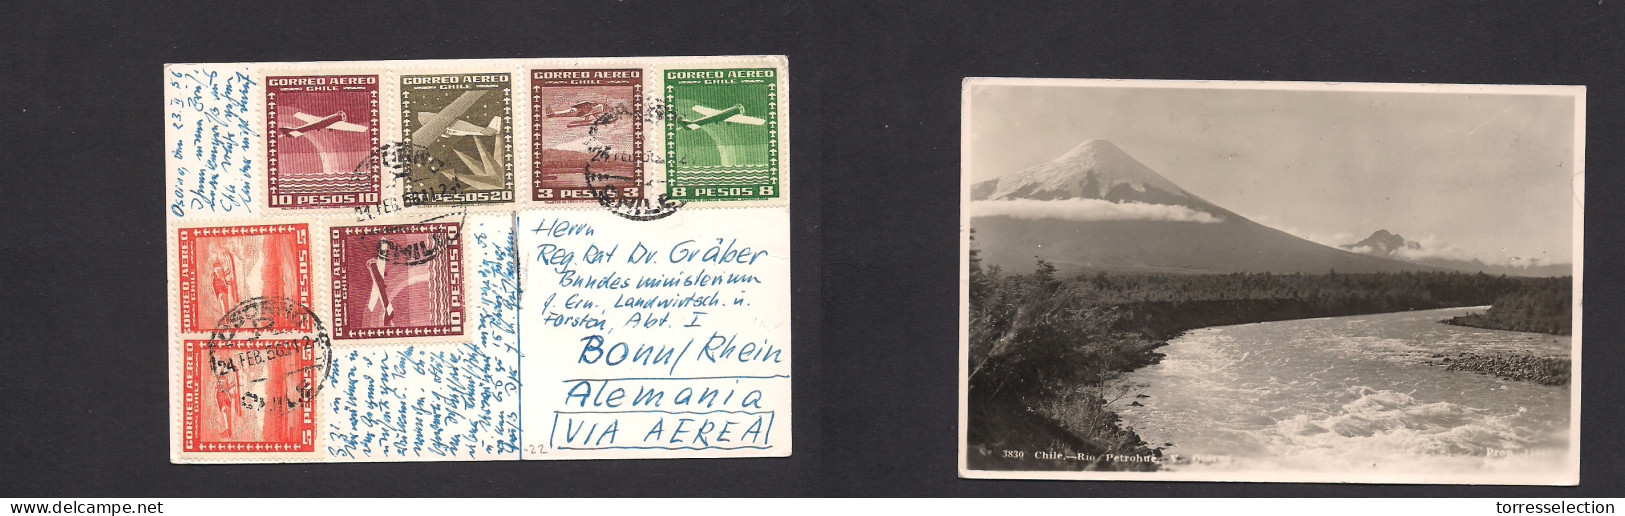 Chile - XX. 1956 (24 Febr) Osorno - West Germany, Bonn. Air Multifkd Env At 61 Pesos Rate, Tied Cds. Attractive. XSALE. - Chile